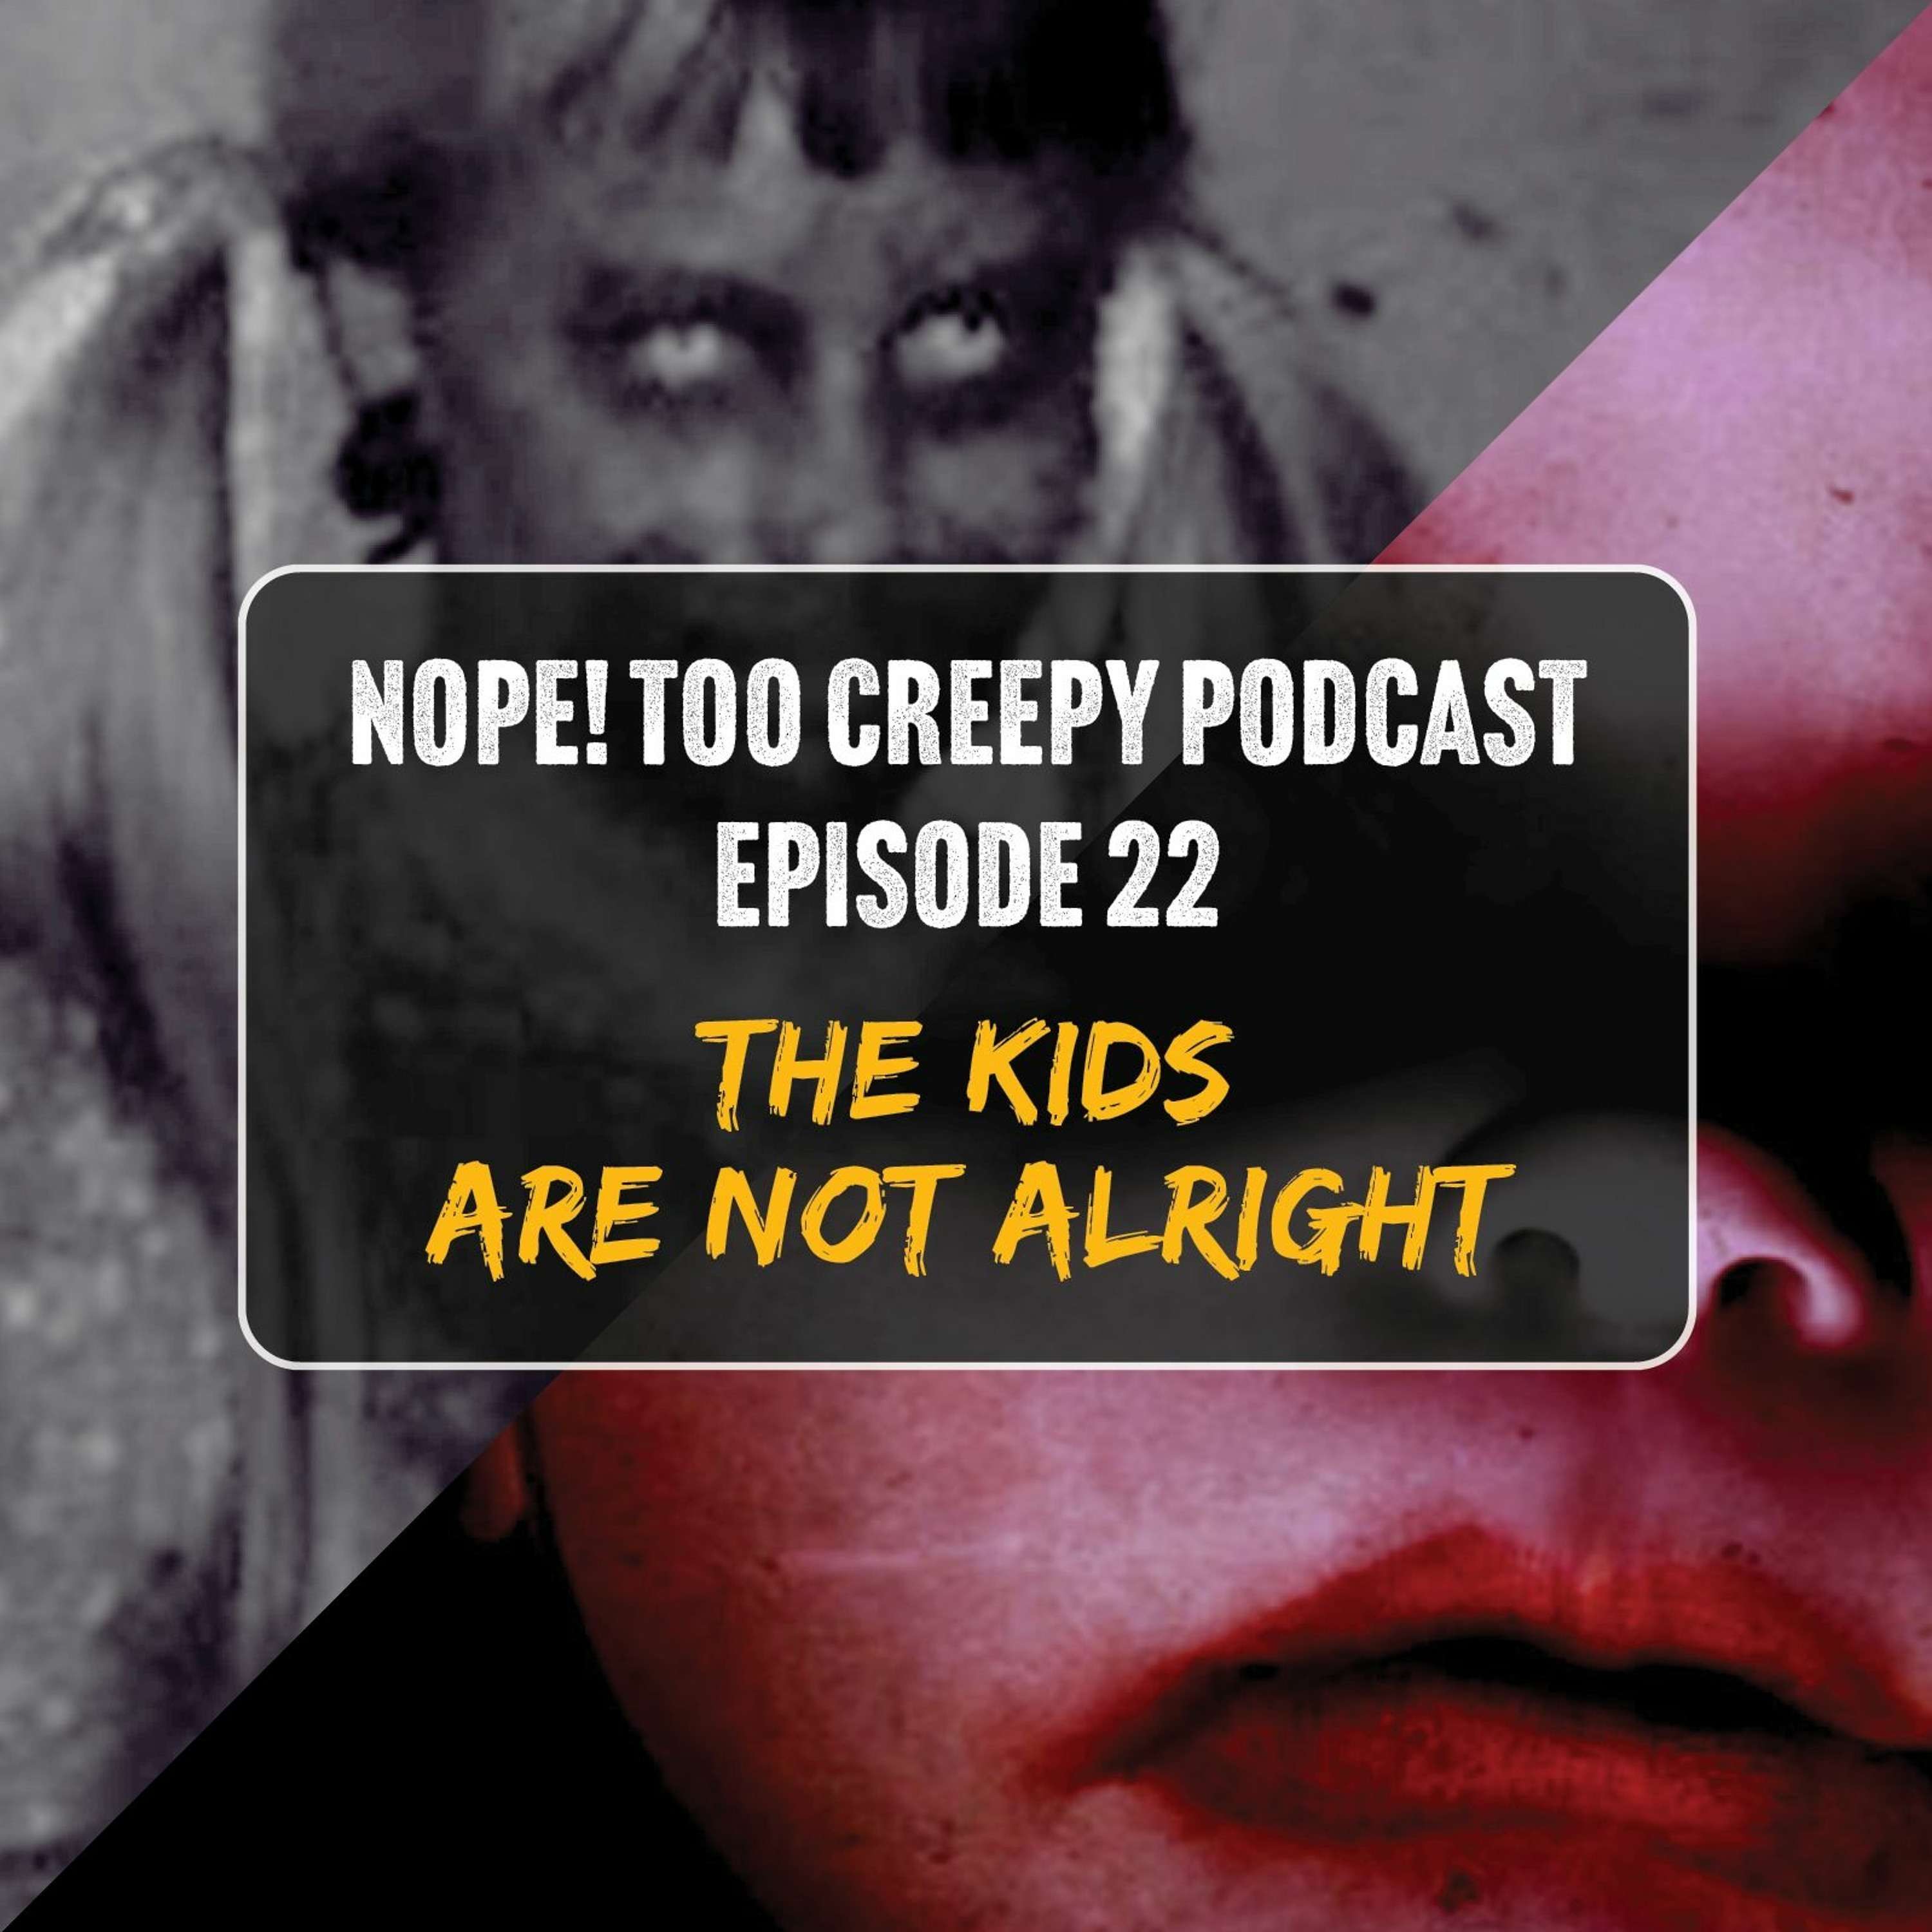 Episode 22: ”The Kids Are Not Alright”